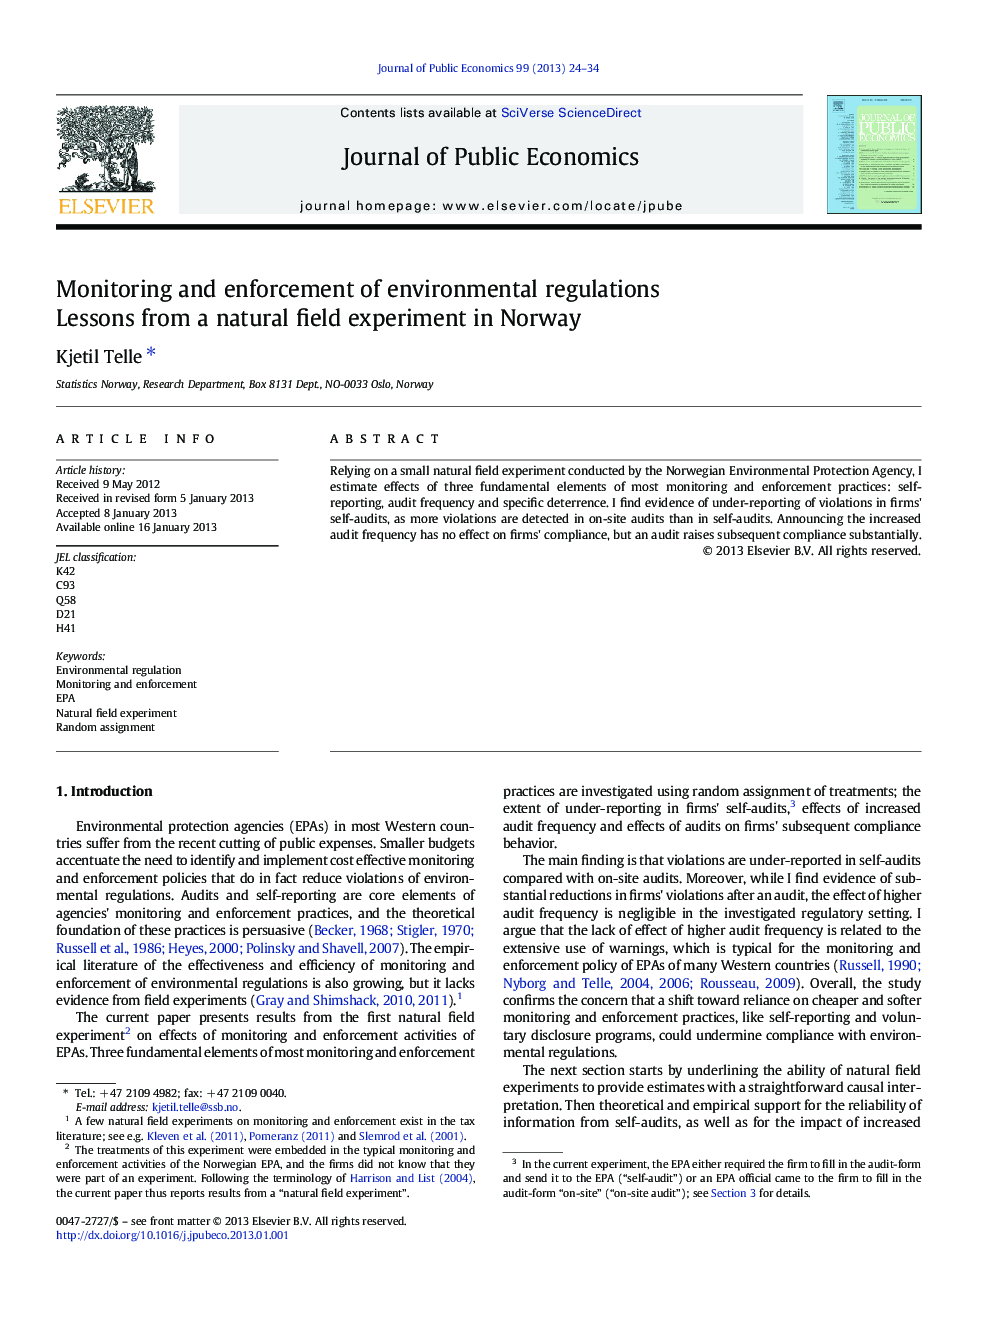 Monitoring and enforcement of environmental regulations: Lessons from a natural field experiment in Norway